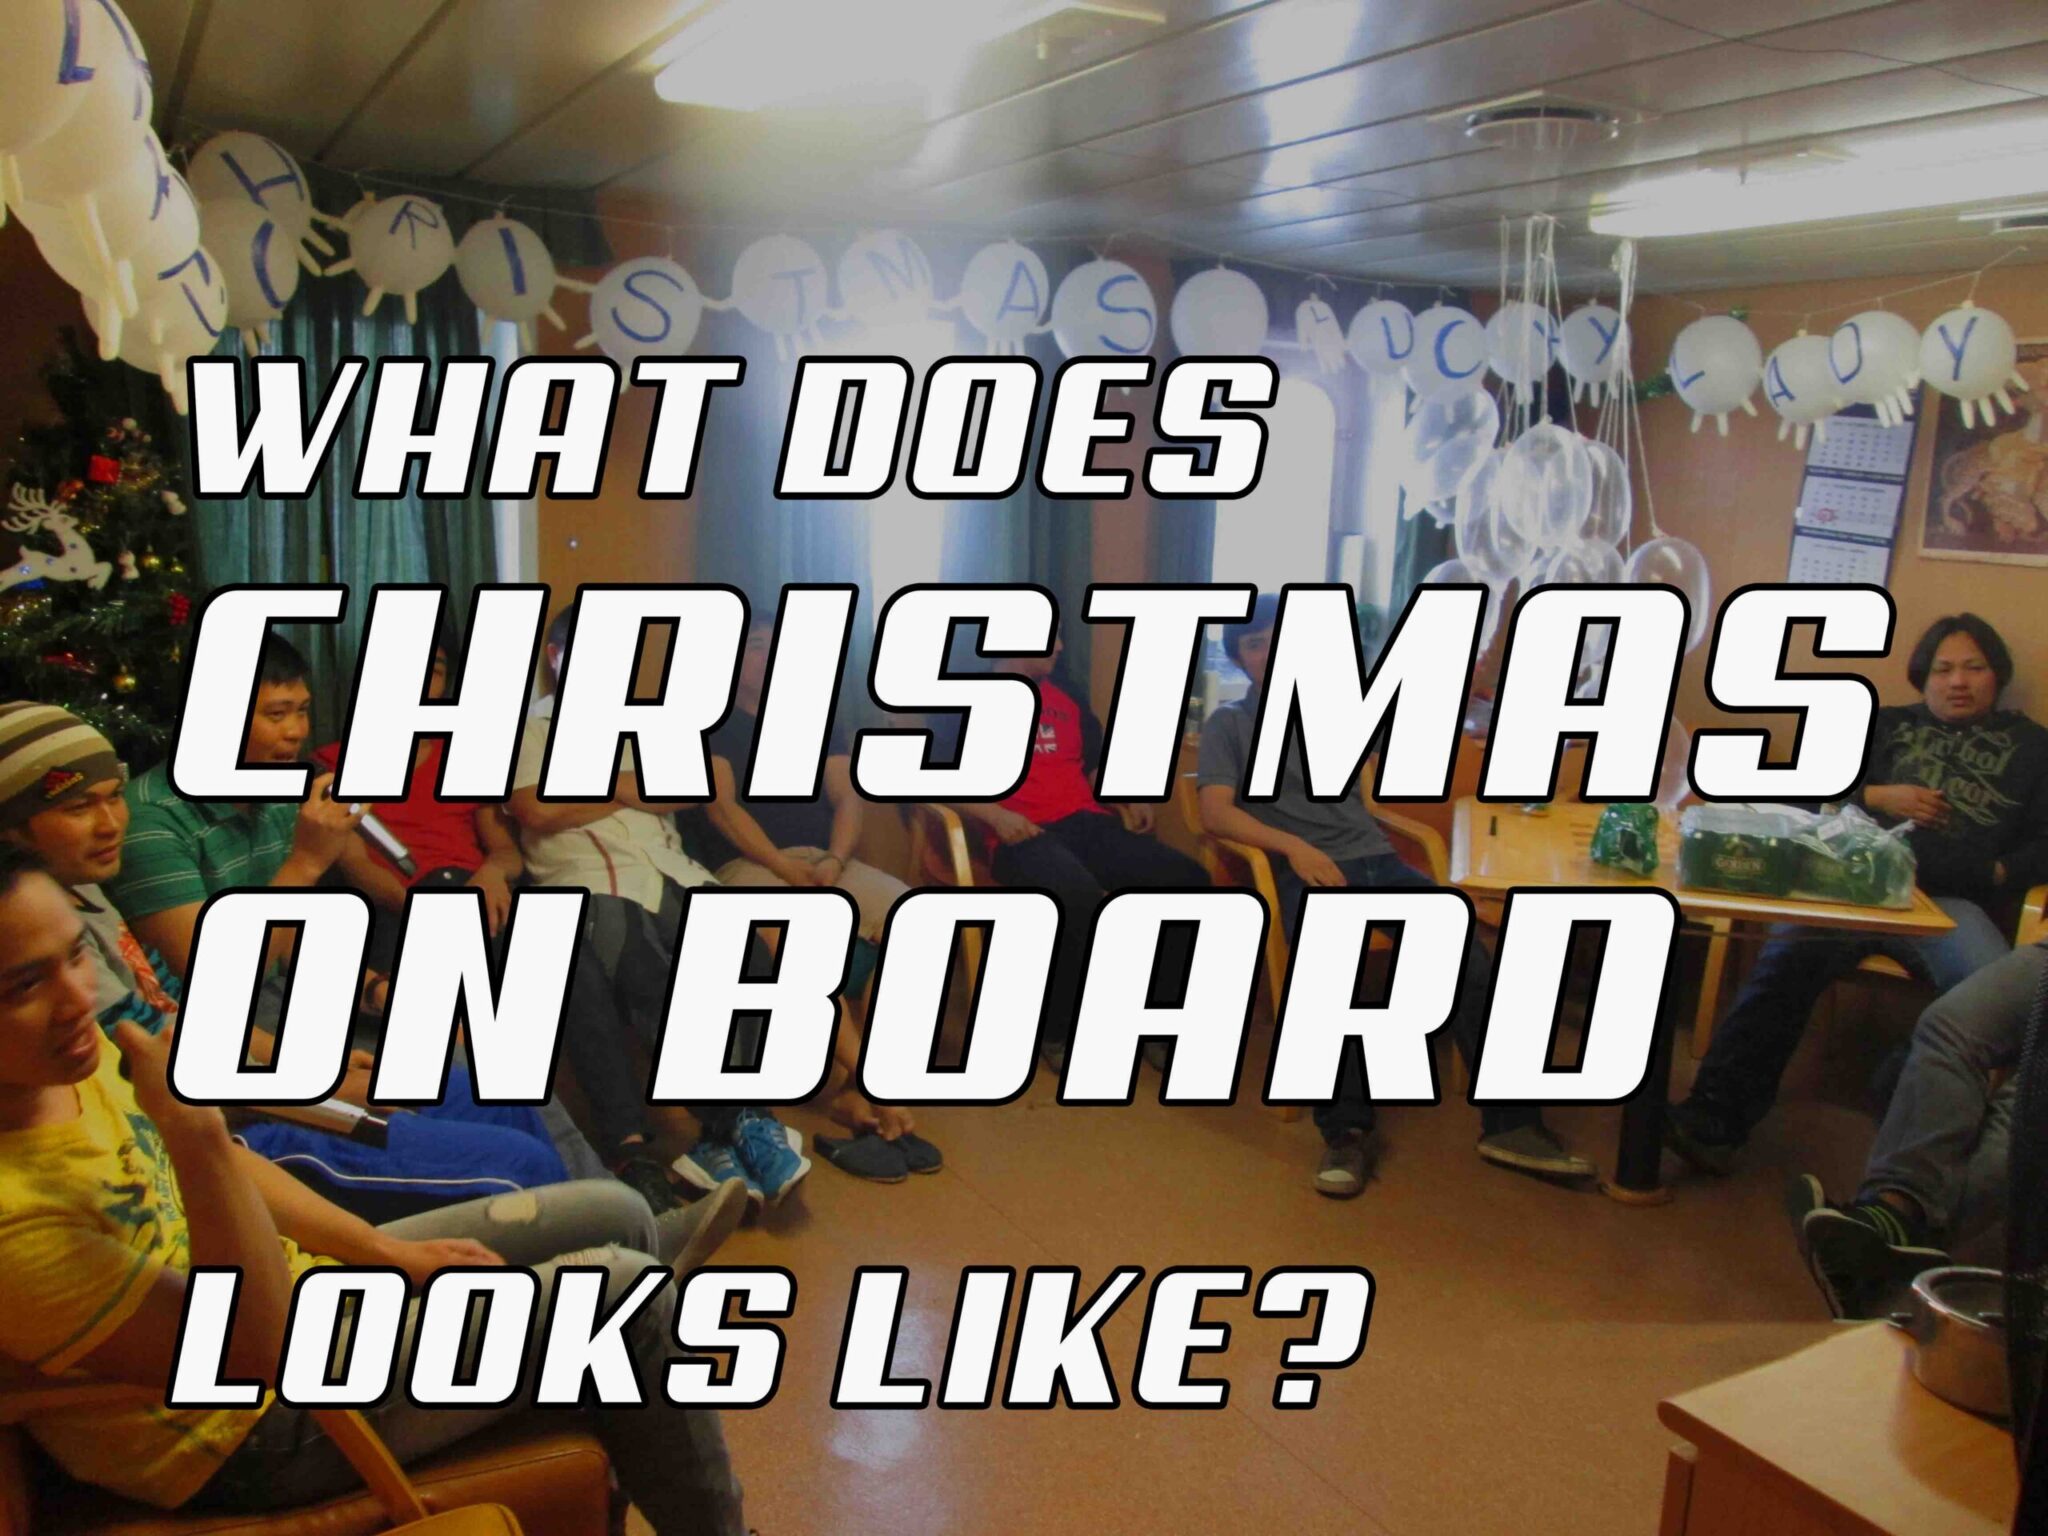 Cover image of the article, "What Does Christmas On Board Looks Like?" featuring the all the crew inside the dayroom.